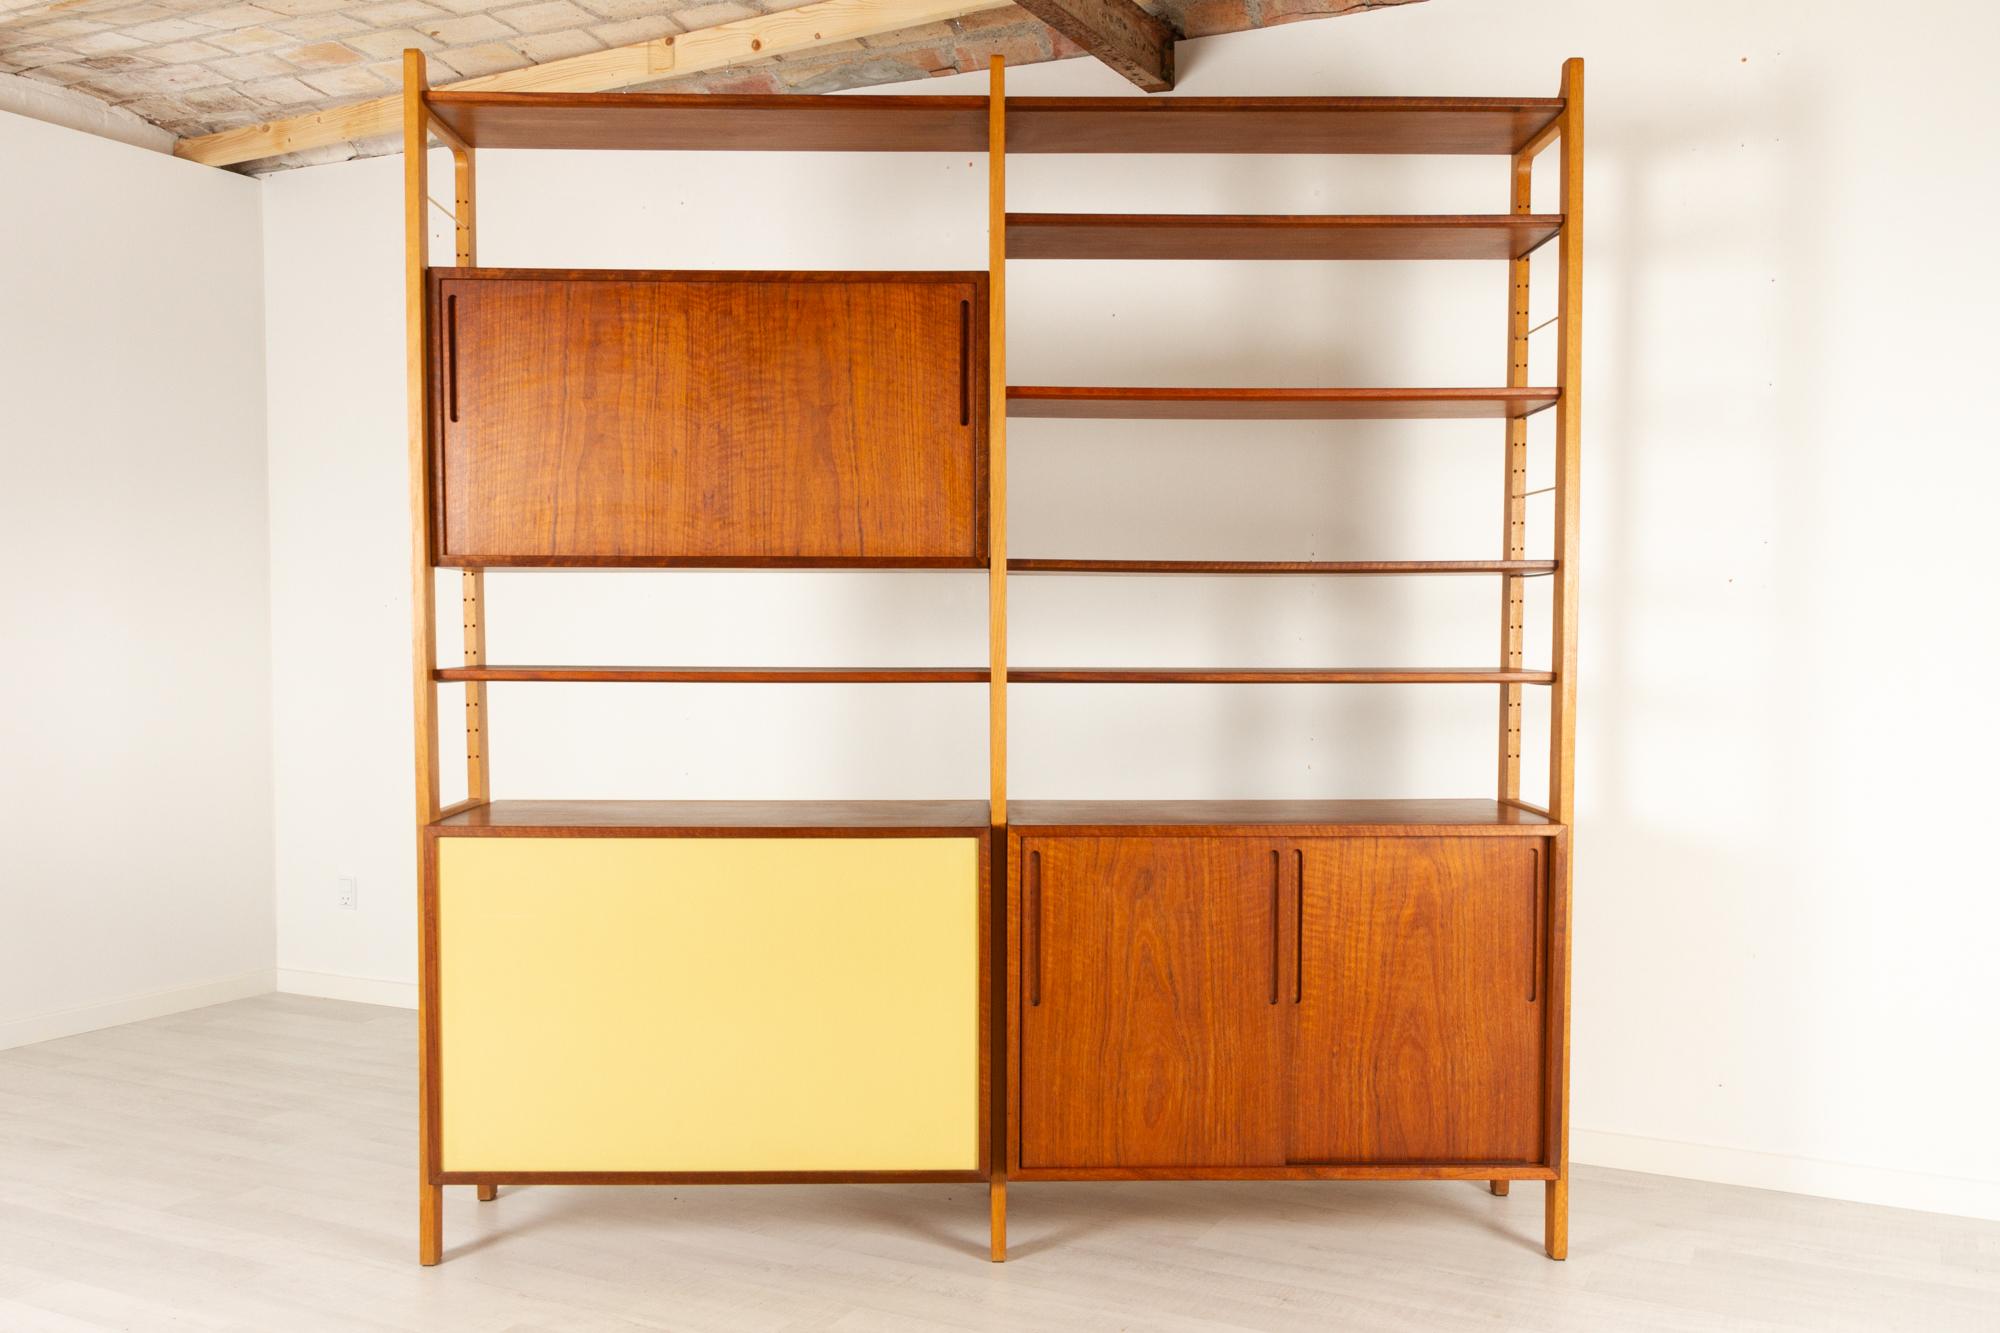 Danish Modern freestanding bookcase by Ib Kofod-Larsen 1954.

Danish modern modular bookcase in Shedua wood and oak designed in 1954 by architect Ib Kofod Larsen and made Brande Møbelfabrik. This is a very rare model, probably the only one that